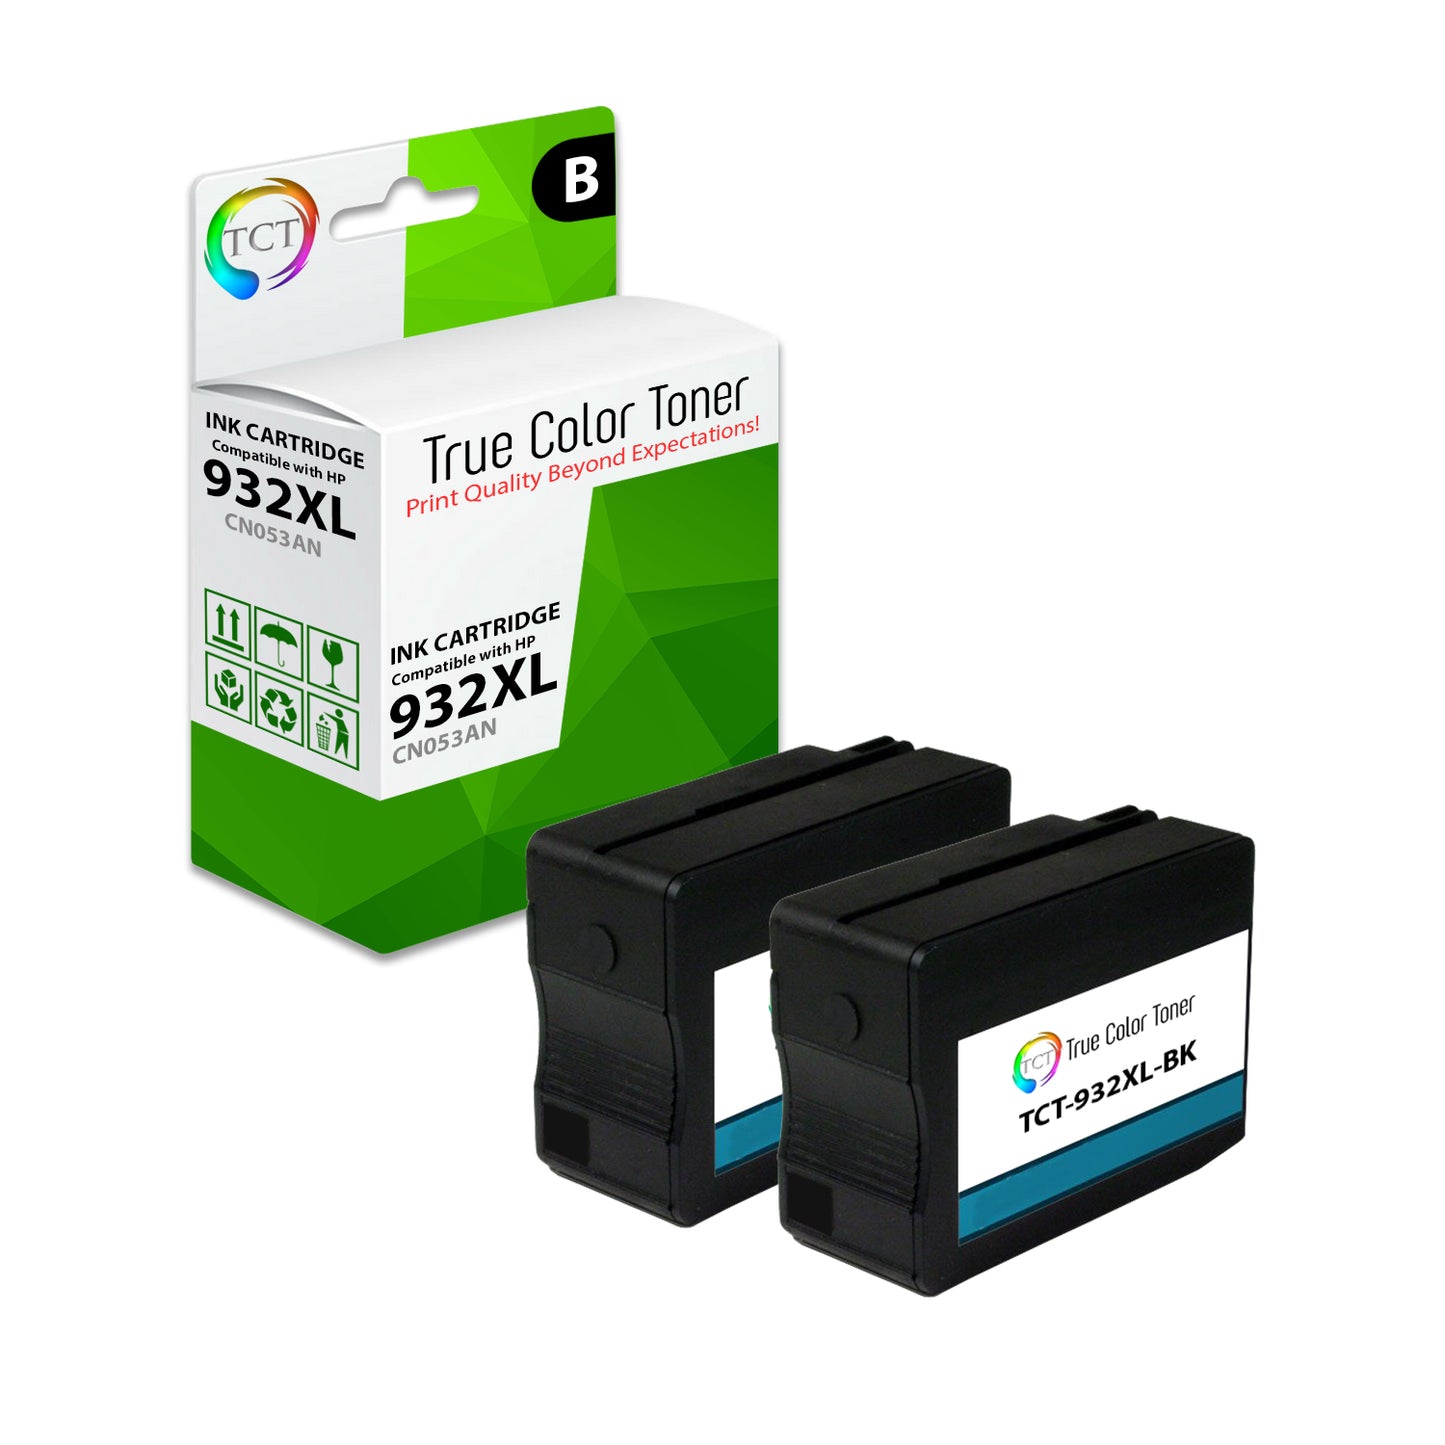 TCT Compatible Ink Cartridge Replacement for the HP 932XL Series - 2 Pack Black